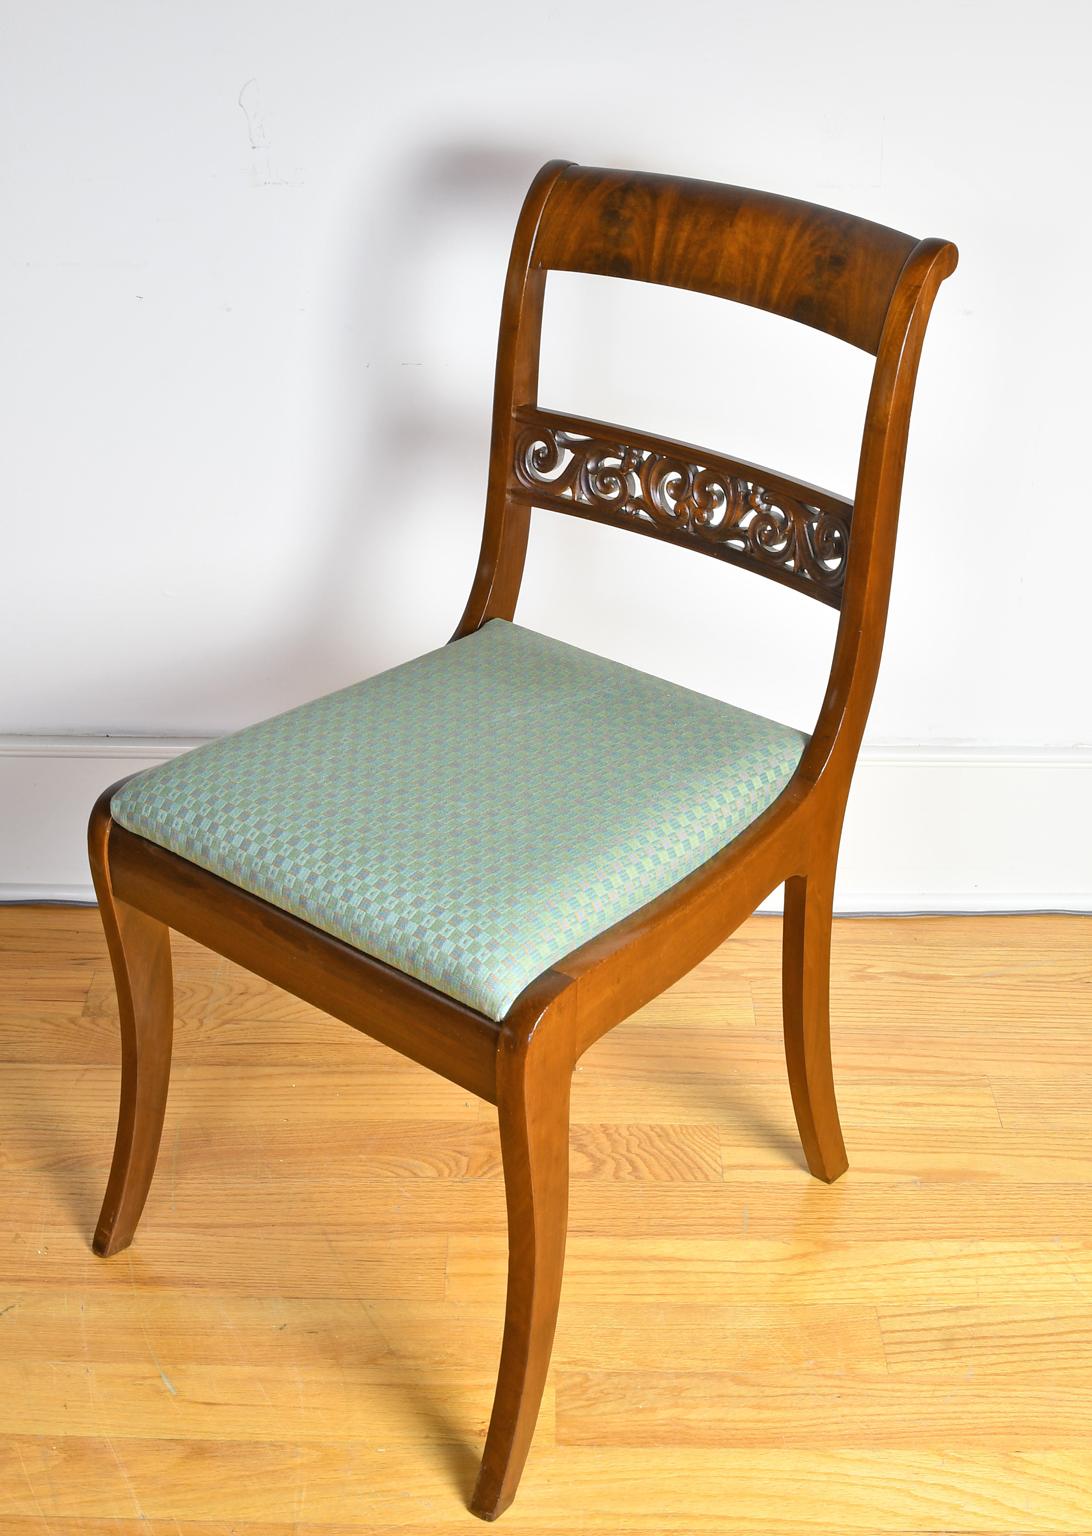 Set of 11 Antique Dining Chairs with 9 Sides & 2 Arms in West Indies Mahogany For Sale 5